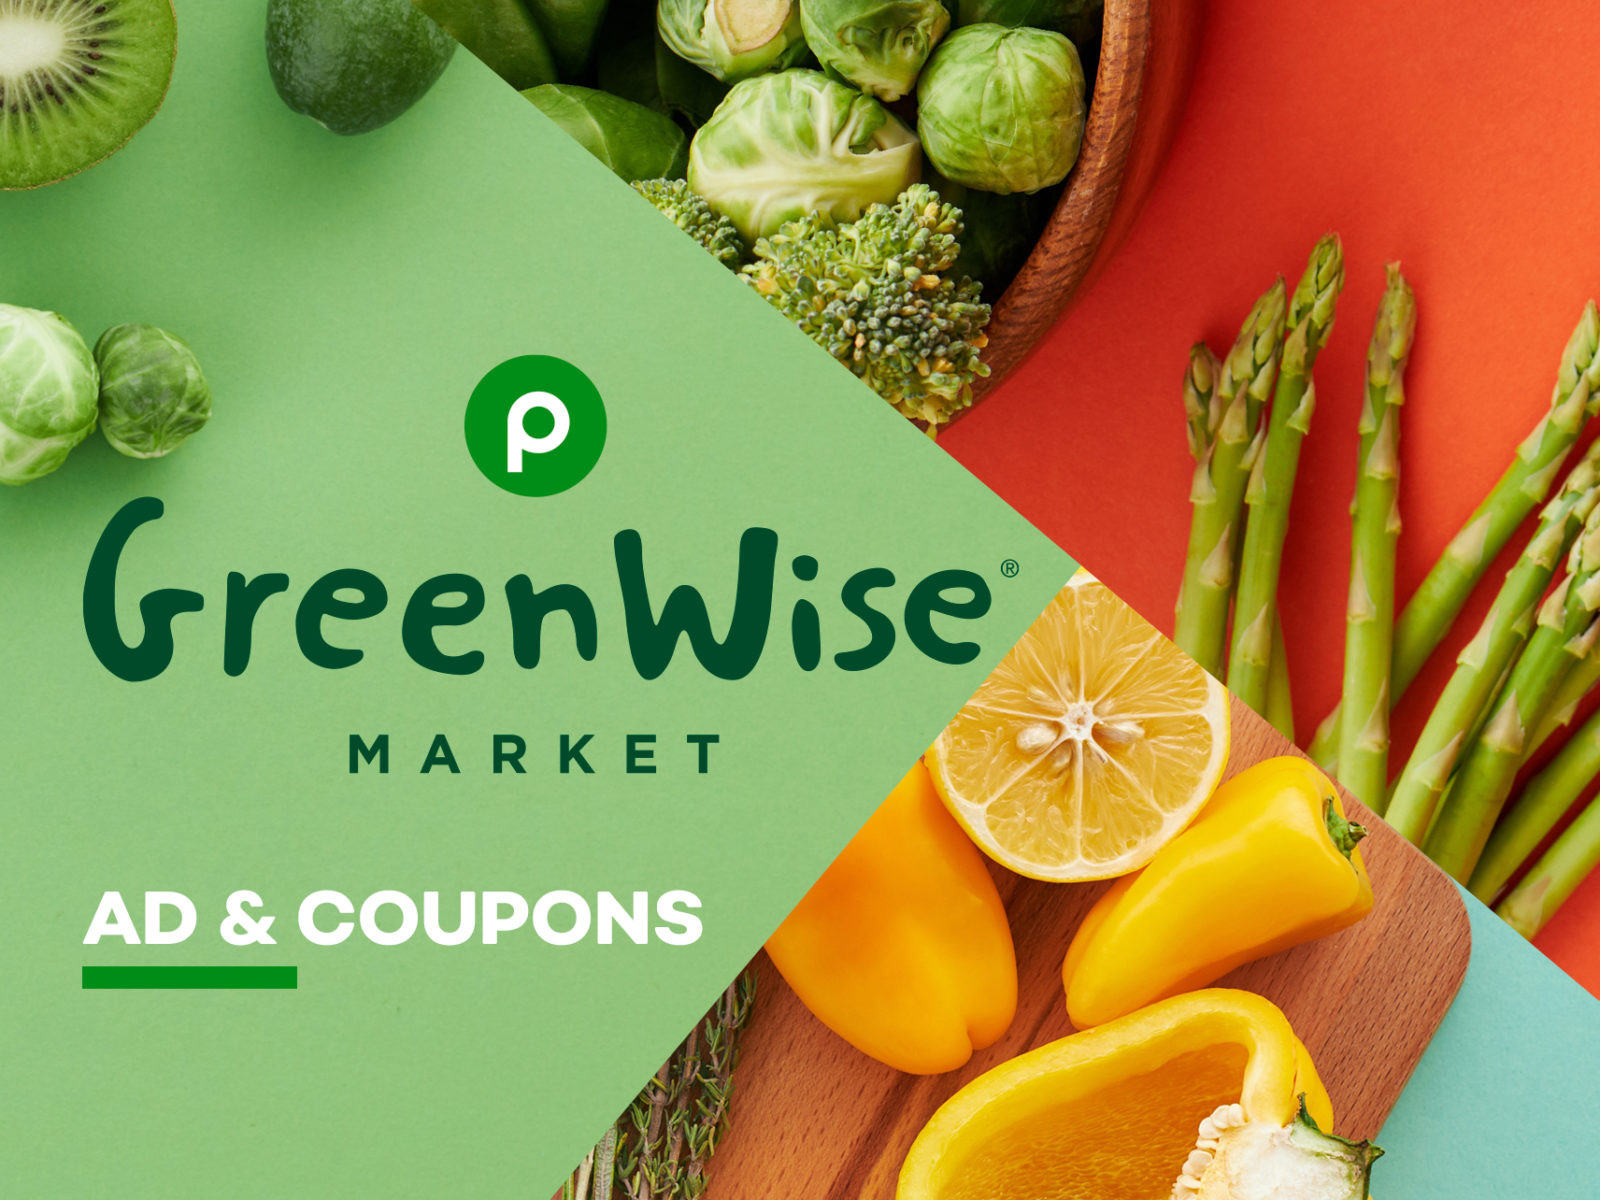 Publix GreenWise Market Ad & Coupons Week Of 12/14 To 12/20 (12/13 To 12/19 For Some)